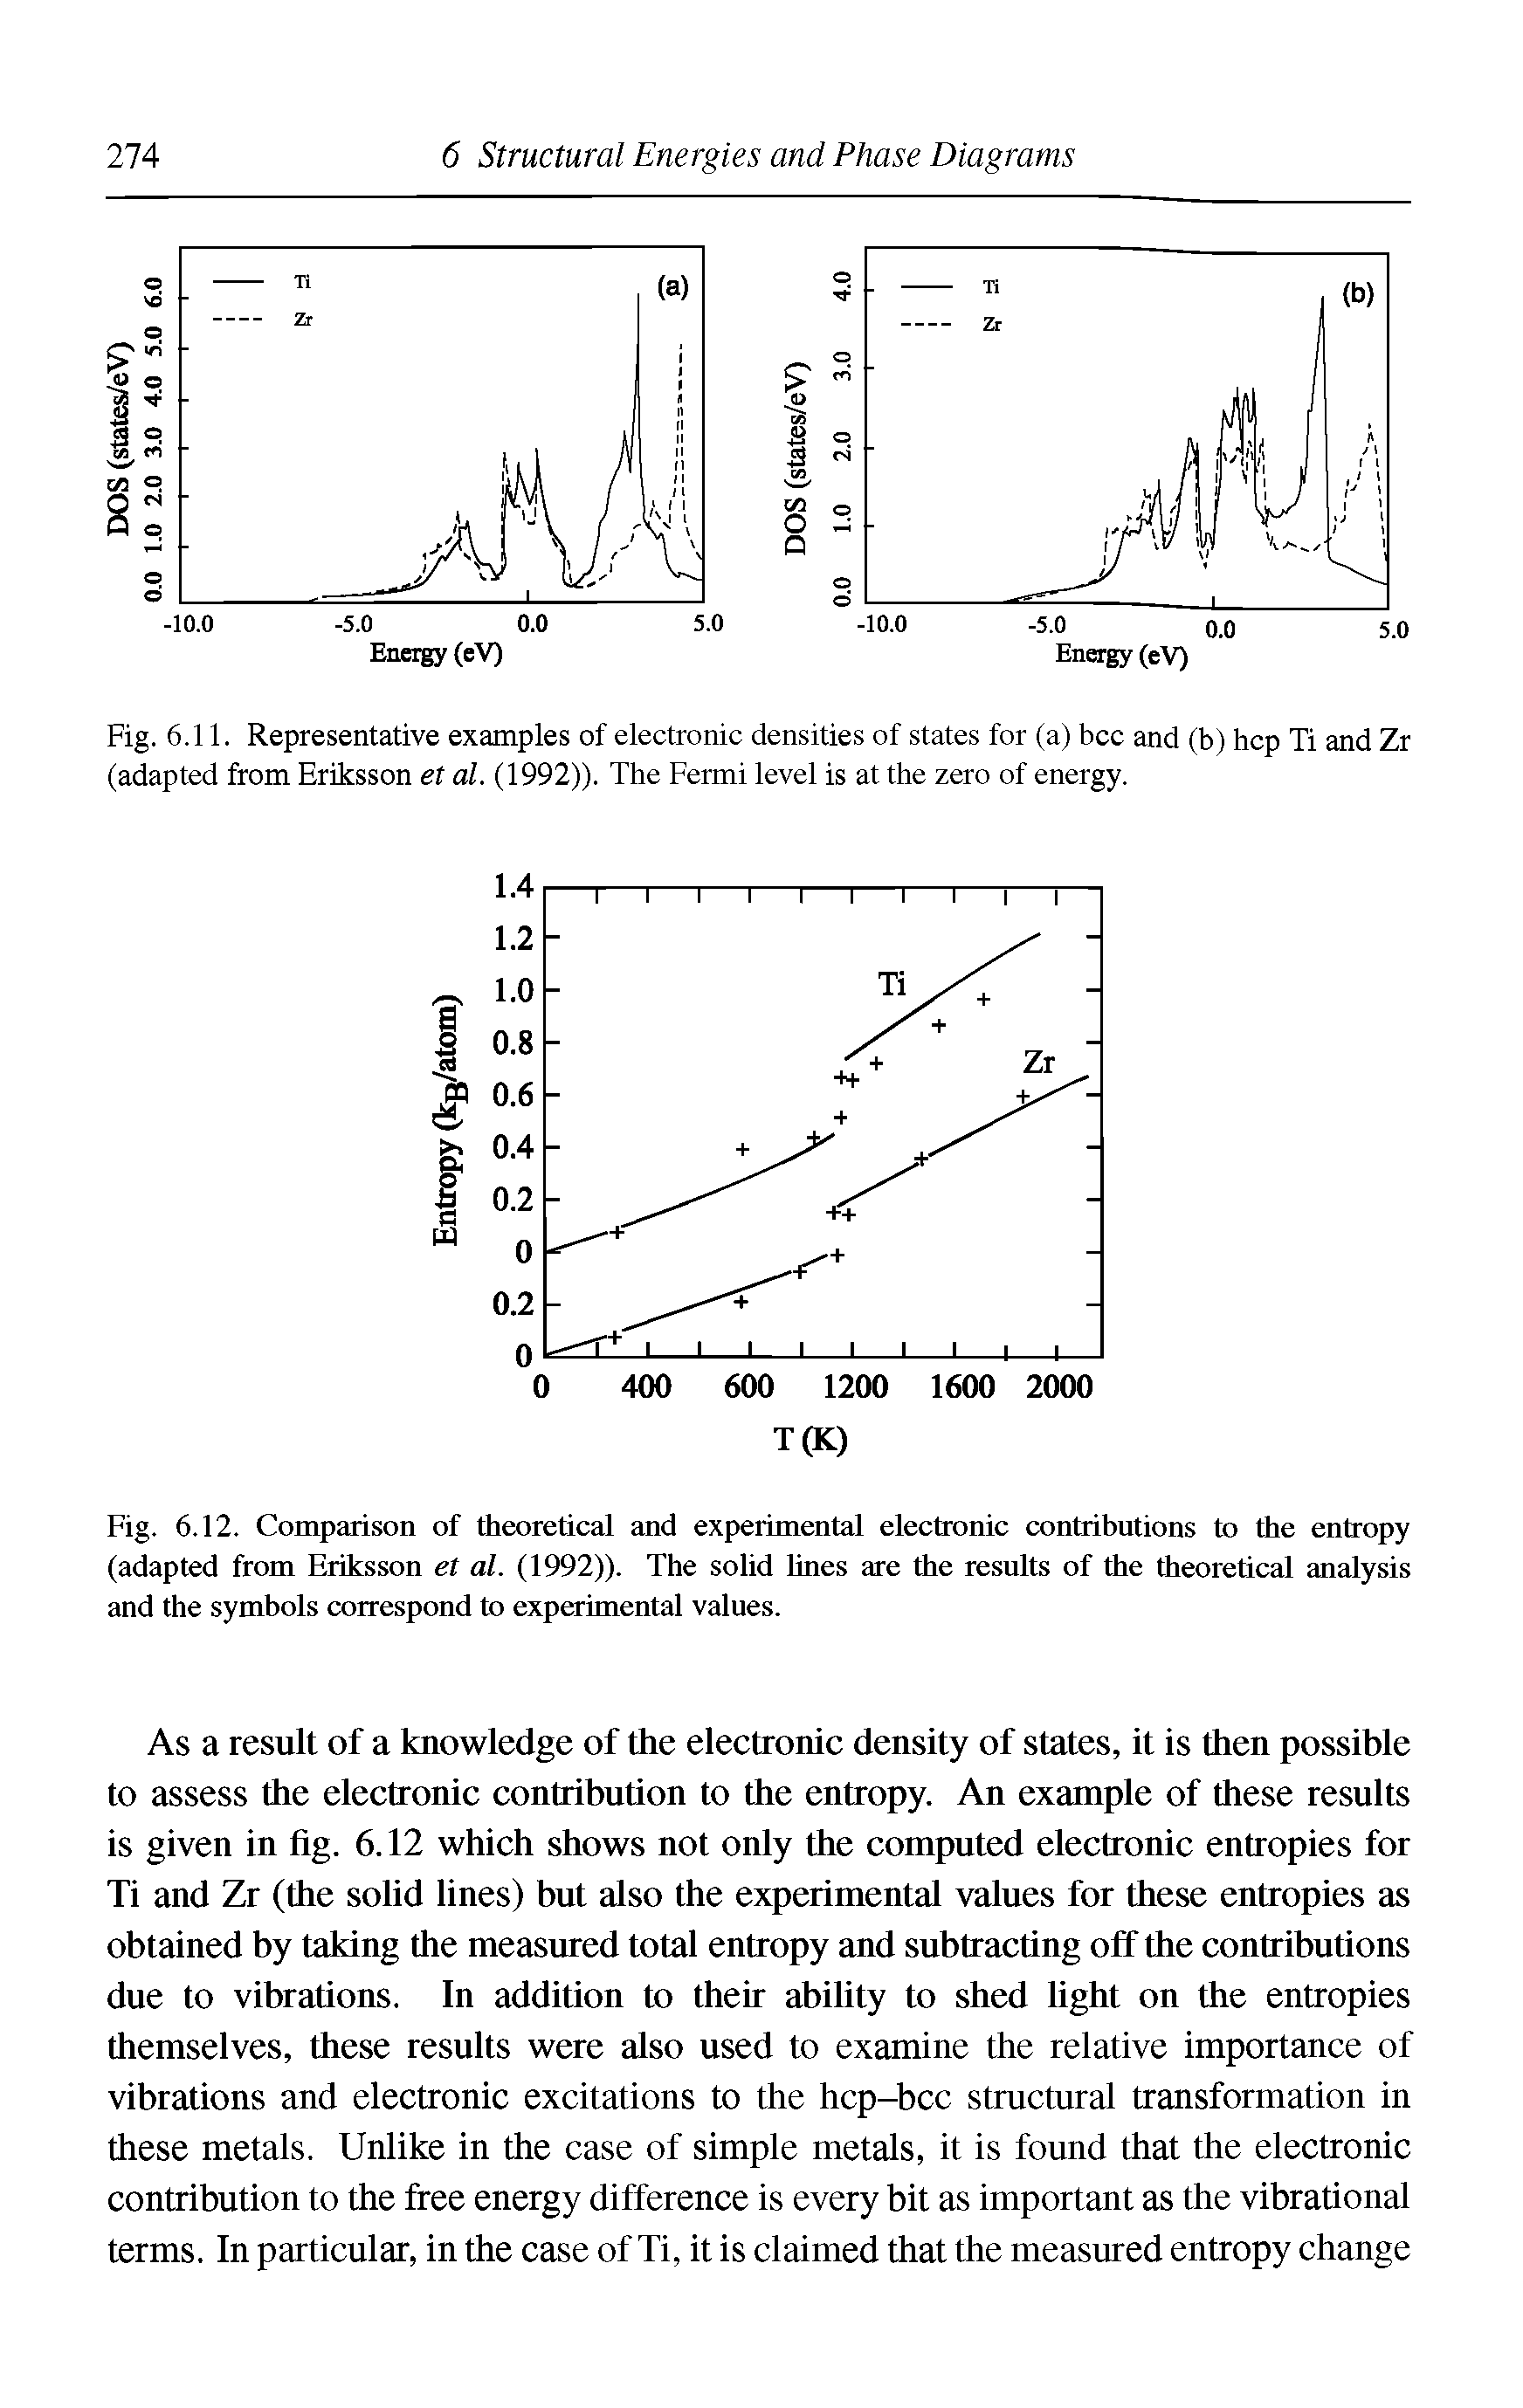 Fig. 6.12. Comparison of theoretical and experimental electronic contributions to the entropy (adapted from Eriksson et at. (1992)). The solid lines are the results of the theoretical analysis and the symbols correspond to experimental values.